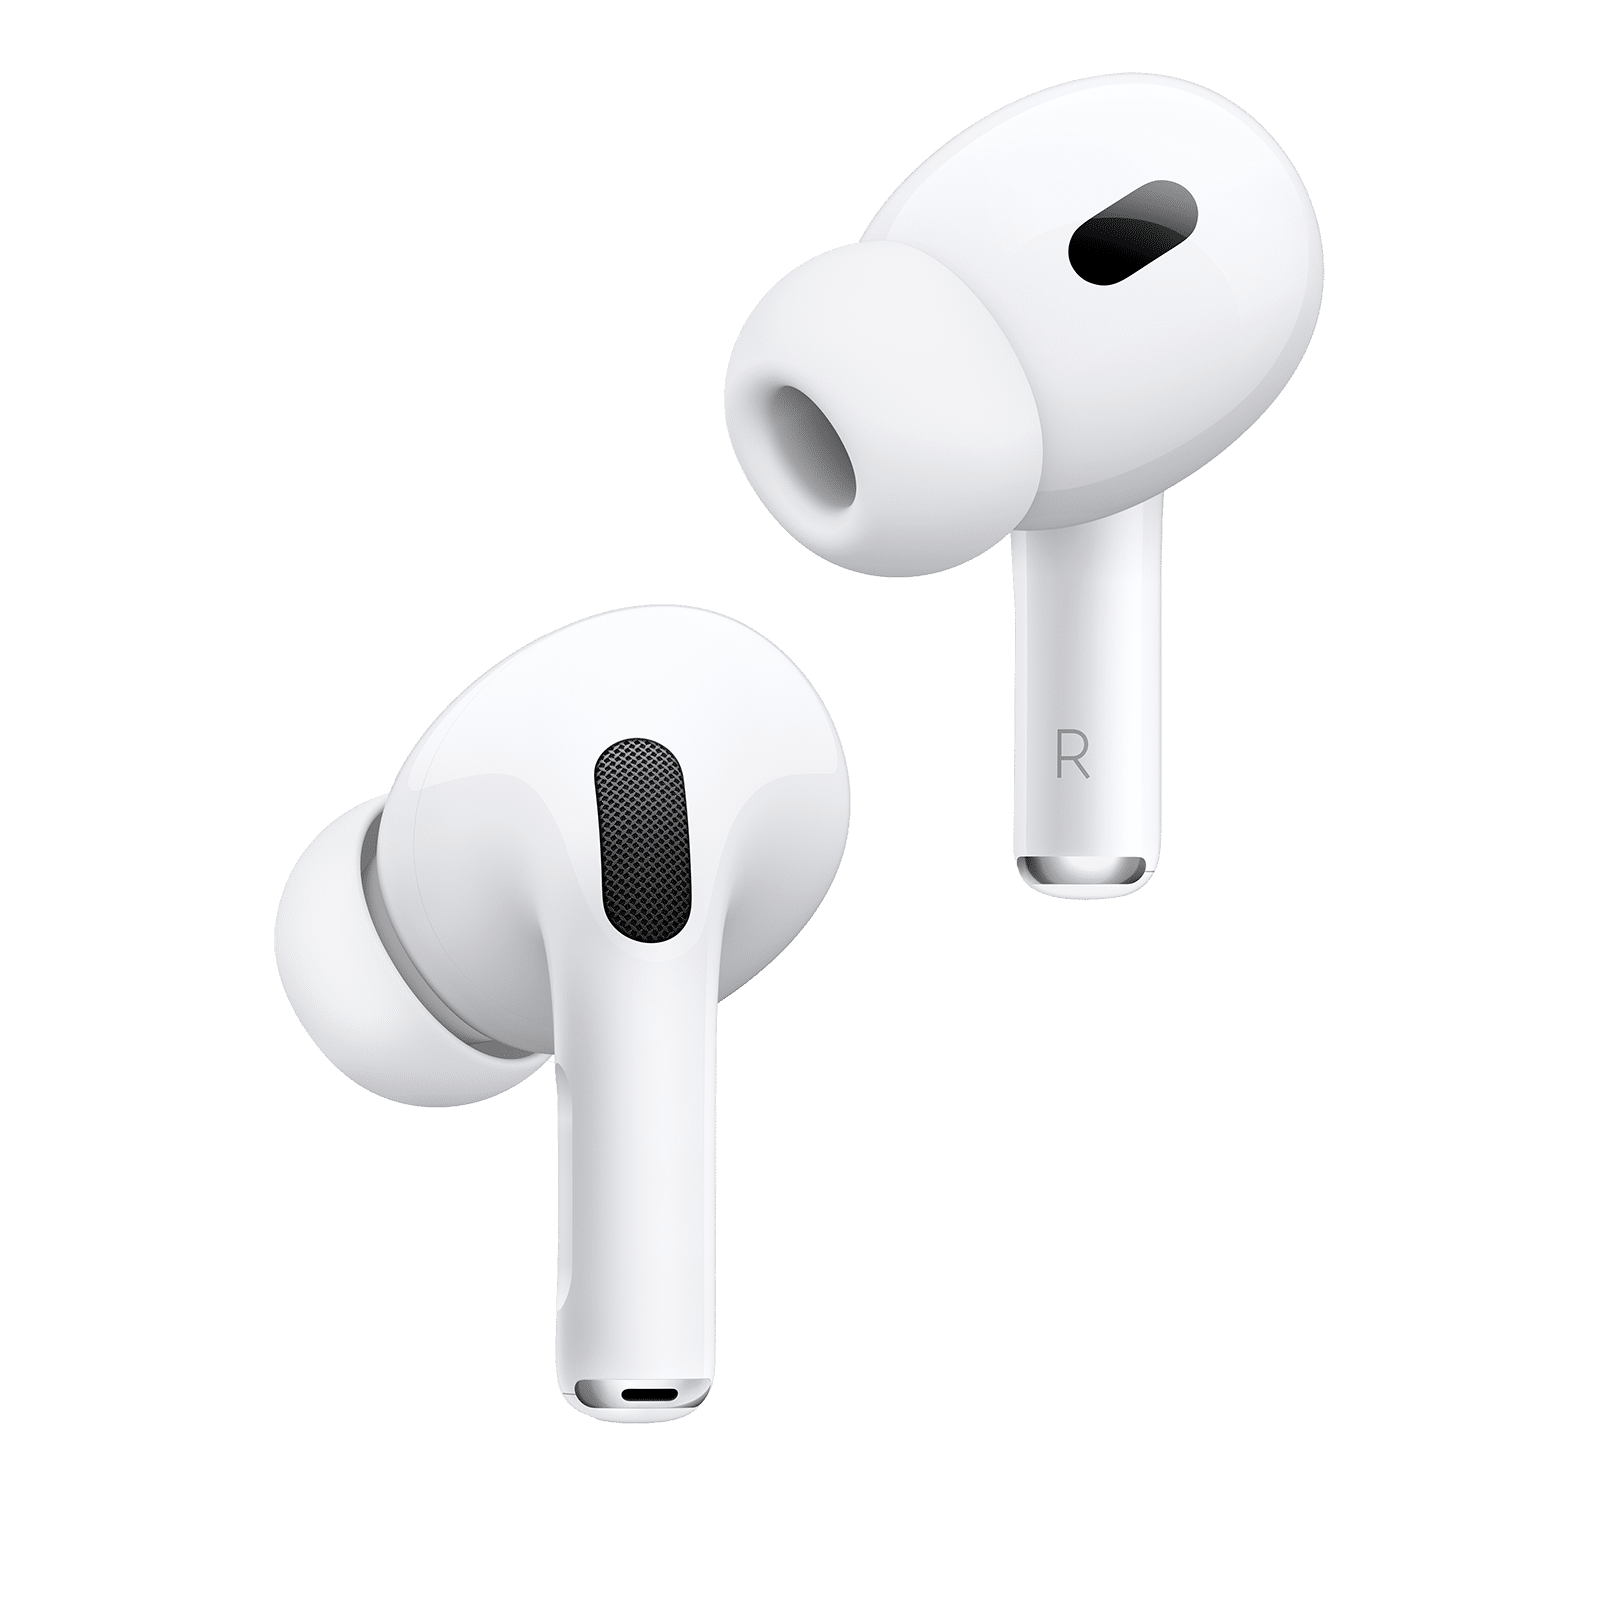 Buy Apple AirPods Pro (2nd Generation) with MagSafe Charging Case Online - Croma